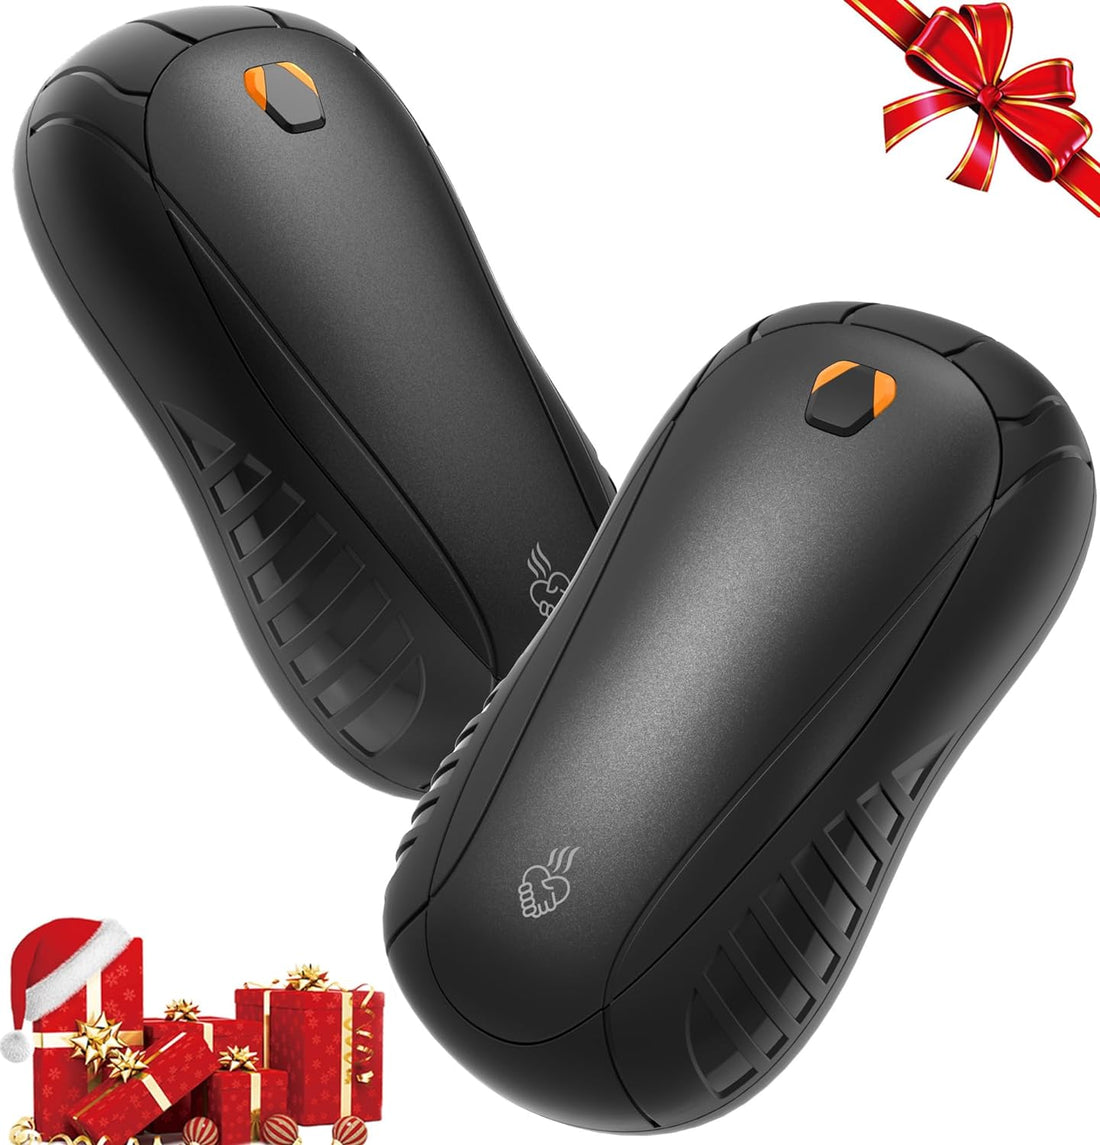 2 Pack Hand Warmers Rechargeable 5200mAh Electric Portable Hand Warmers 2 in 1 FANDLISS Electric Portable Pocket Heater with 12Hrs & 3 Level Warmth Gift for Christmas, Outdoor, Women Men Gift